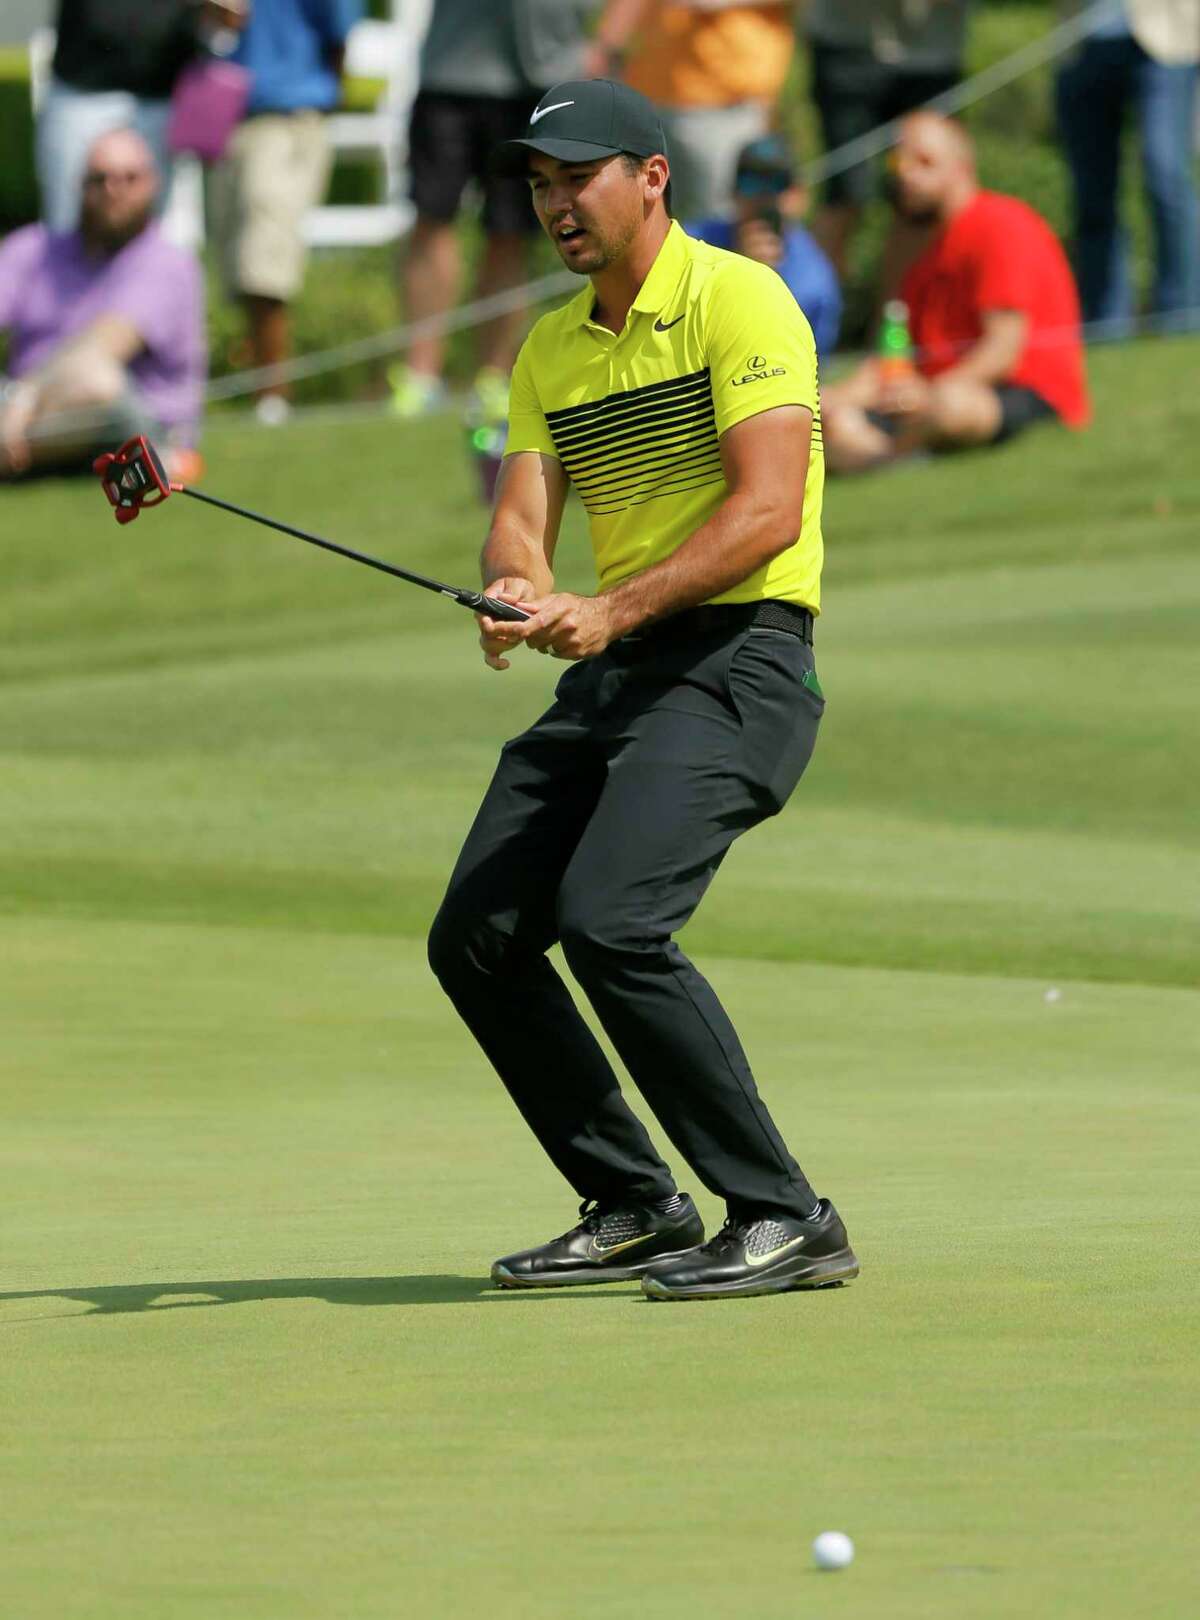 Jason Day, of Australia, reacts to missing a putt for birdie on the 18th green during the third round of the Byron Nelson golf tournament, Saturday, May 20, 2017, in Irving, Texas. (AP Photo/Tony Gutierrez)